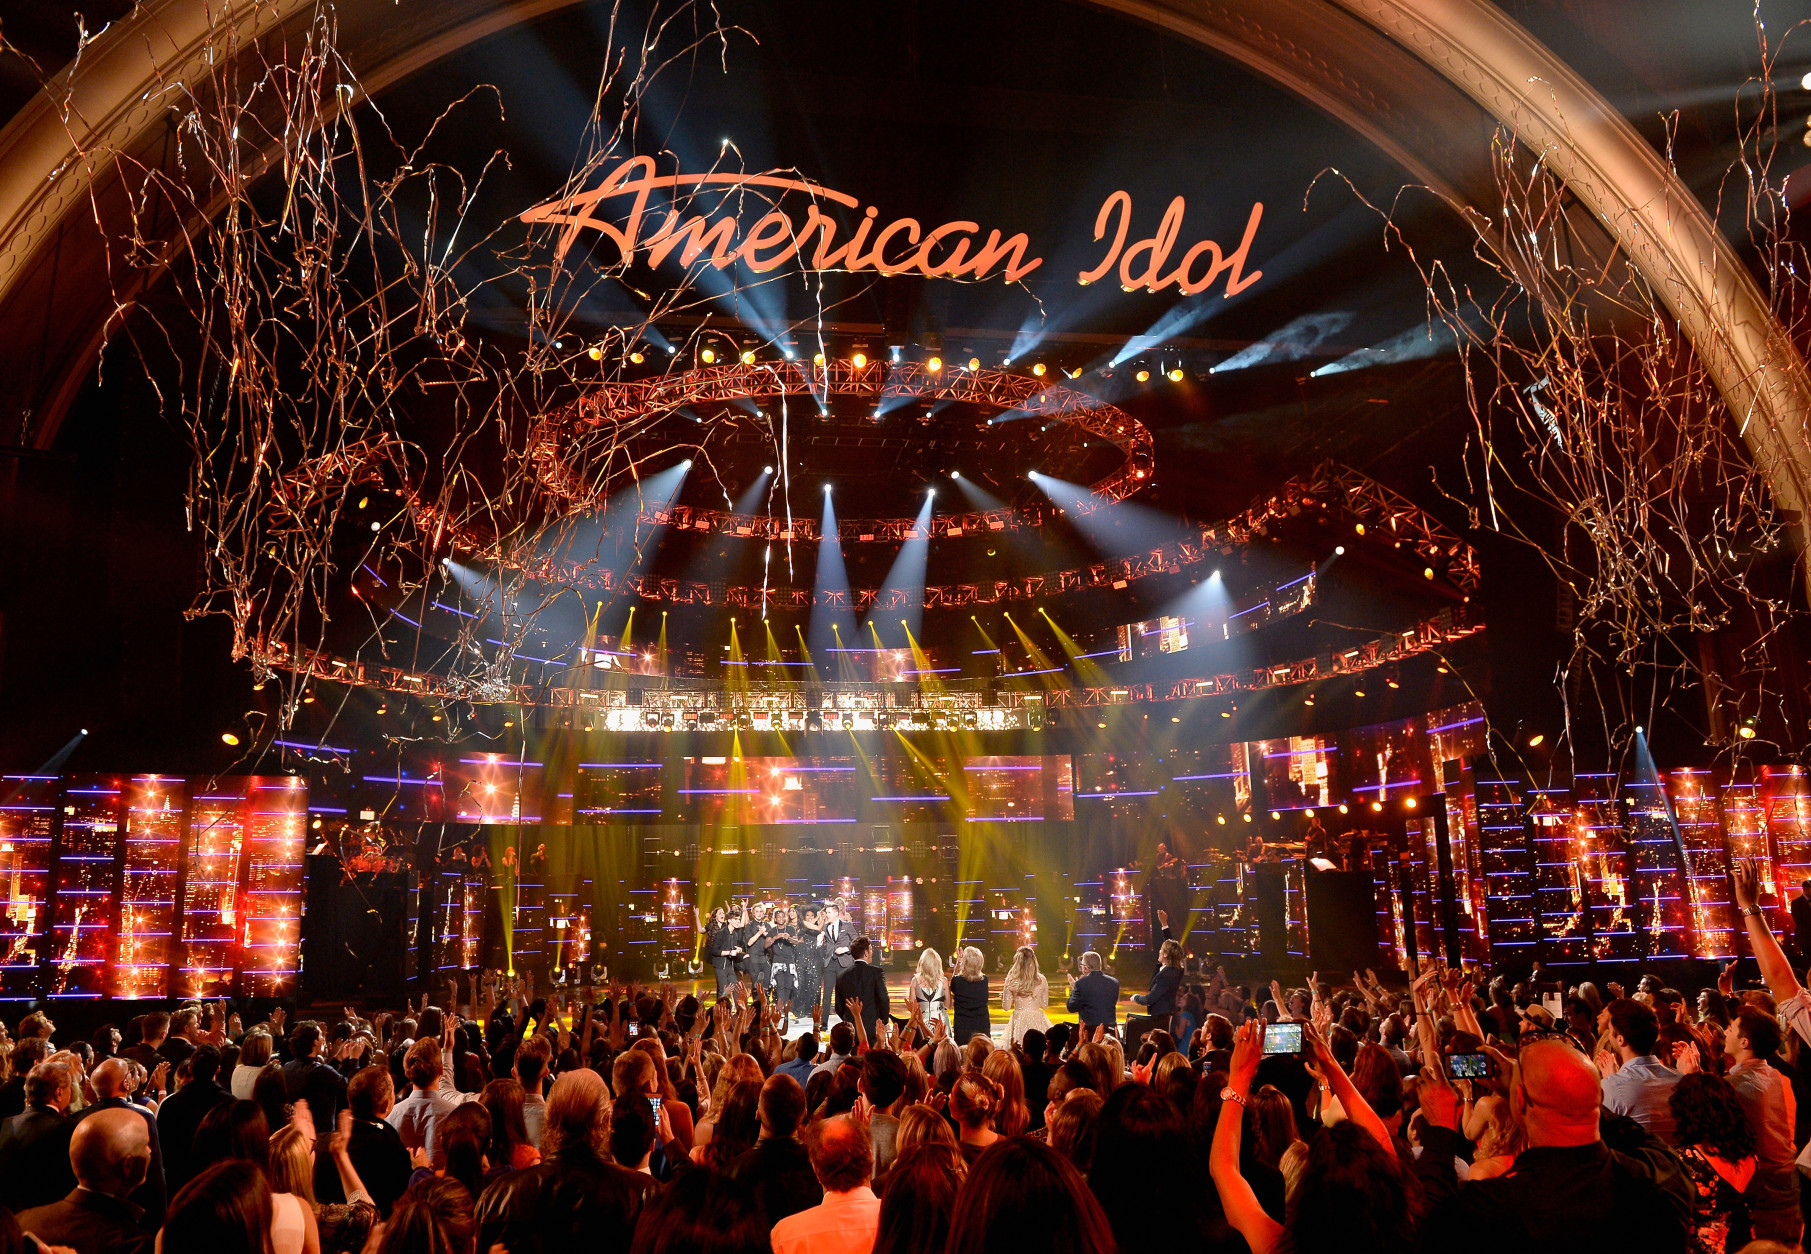 HOLLYWOOD, CALIFORNIA - APRIL 07:  American Idol Season 15 winner Trent Harmon performs coronation song with cast of Season 15 onstage during FOX's "American Idol" Finale For The Farewell Season at Dolby Theatre on April 7, 2016 in Hollywood, California. at Dolby Theatre on April 7, 2016 in Hollywood, California.  (Photo by Kevork Djansezian/Getty Images)